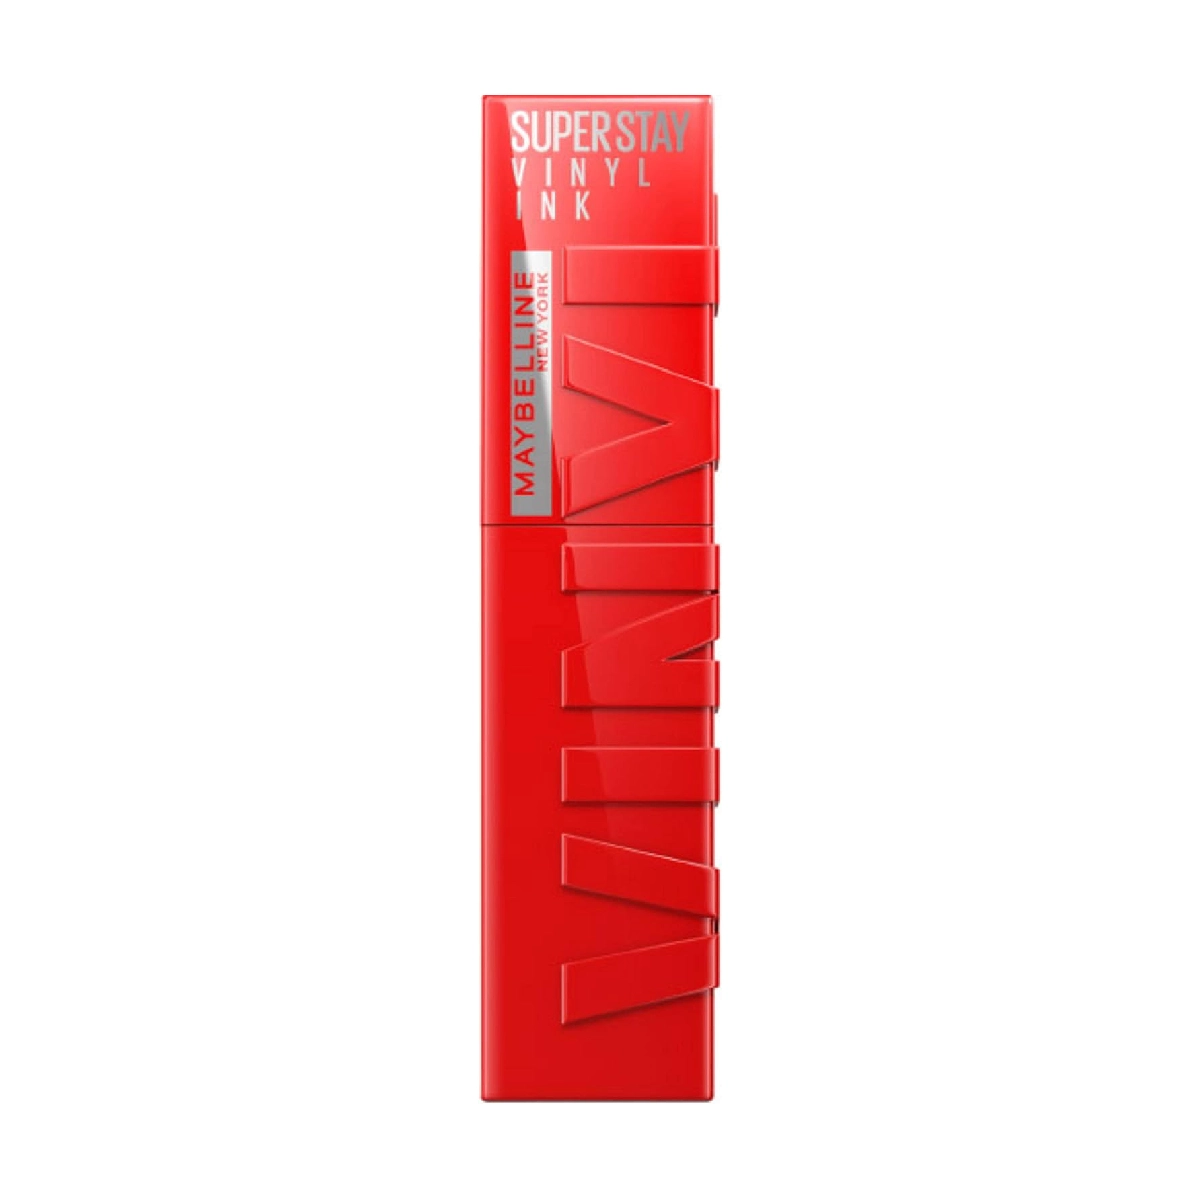 Maybelline Superstay Vinyl Ink Liquid Lipstick in Red-hot - long-lasting liquid lipstick in a vivid red shade